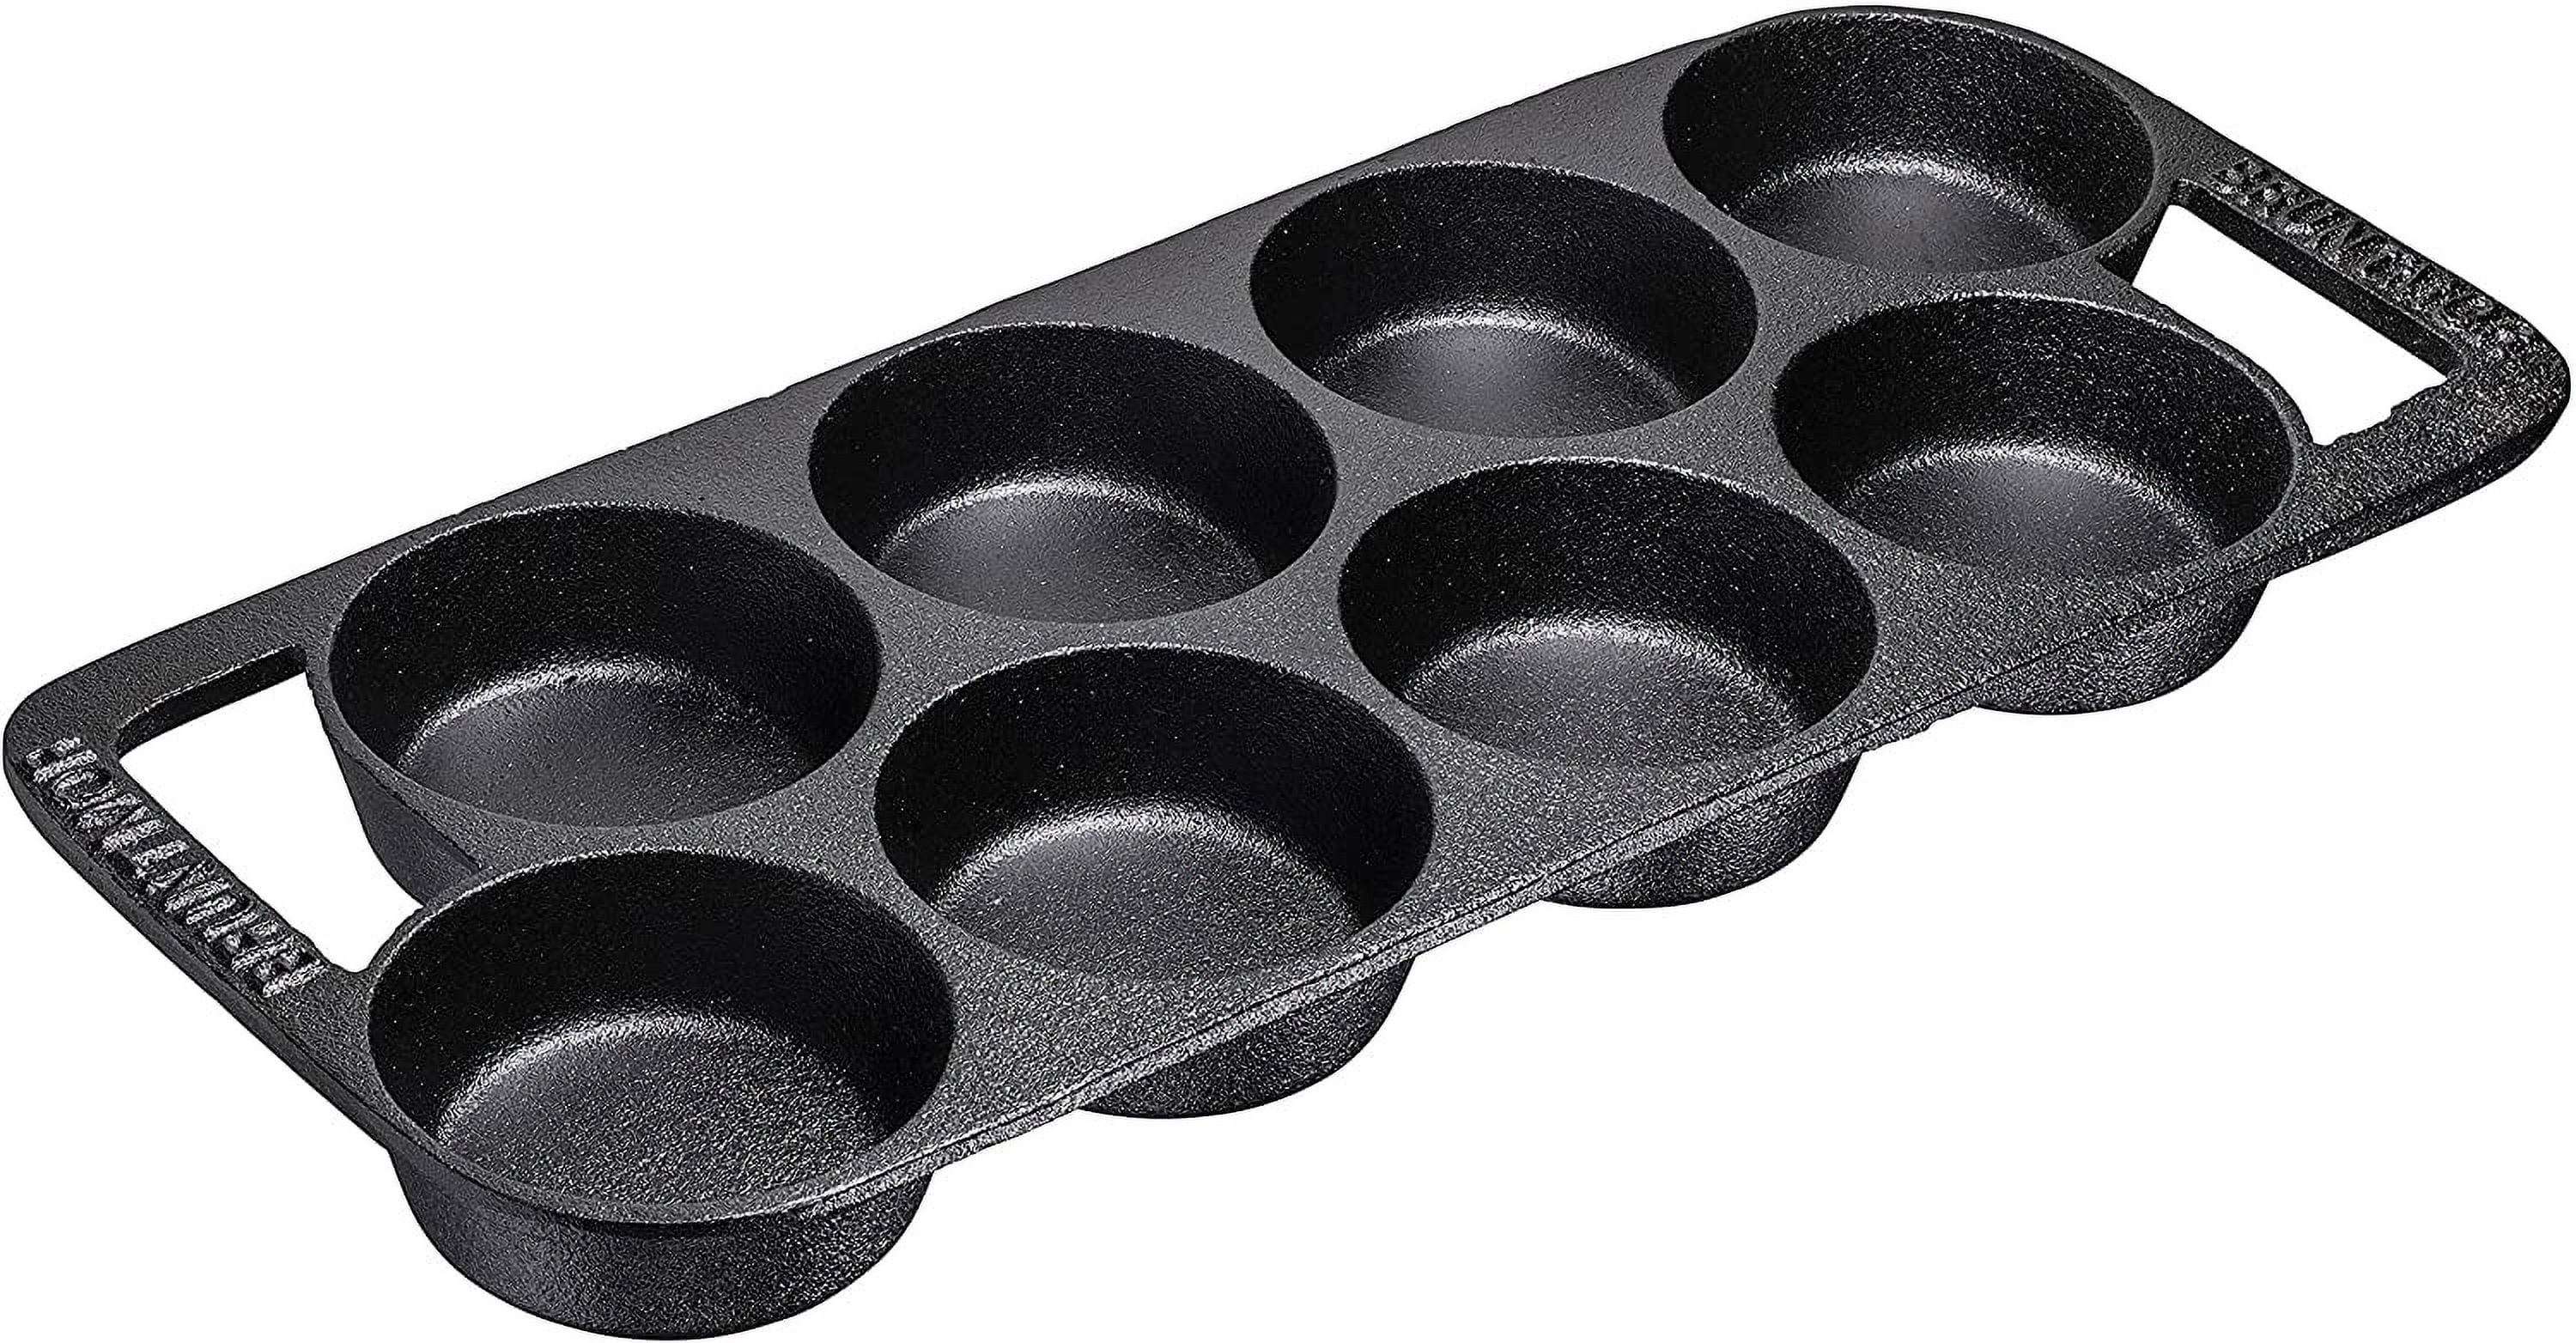 Biscuit Pan - Pre-Seasoned Cast Iron Skillet for Baking Biscuits, Muffins,  Mini Cakes - with Silicone Trivet - by KUHA